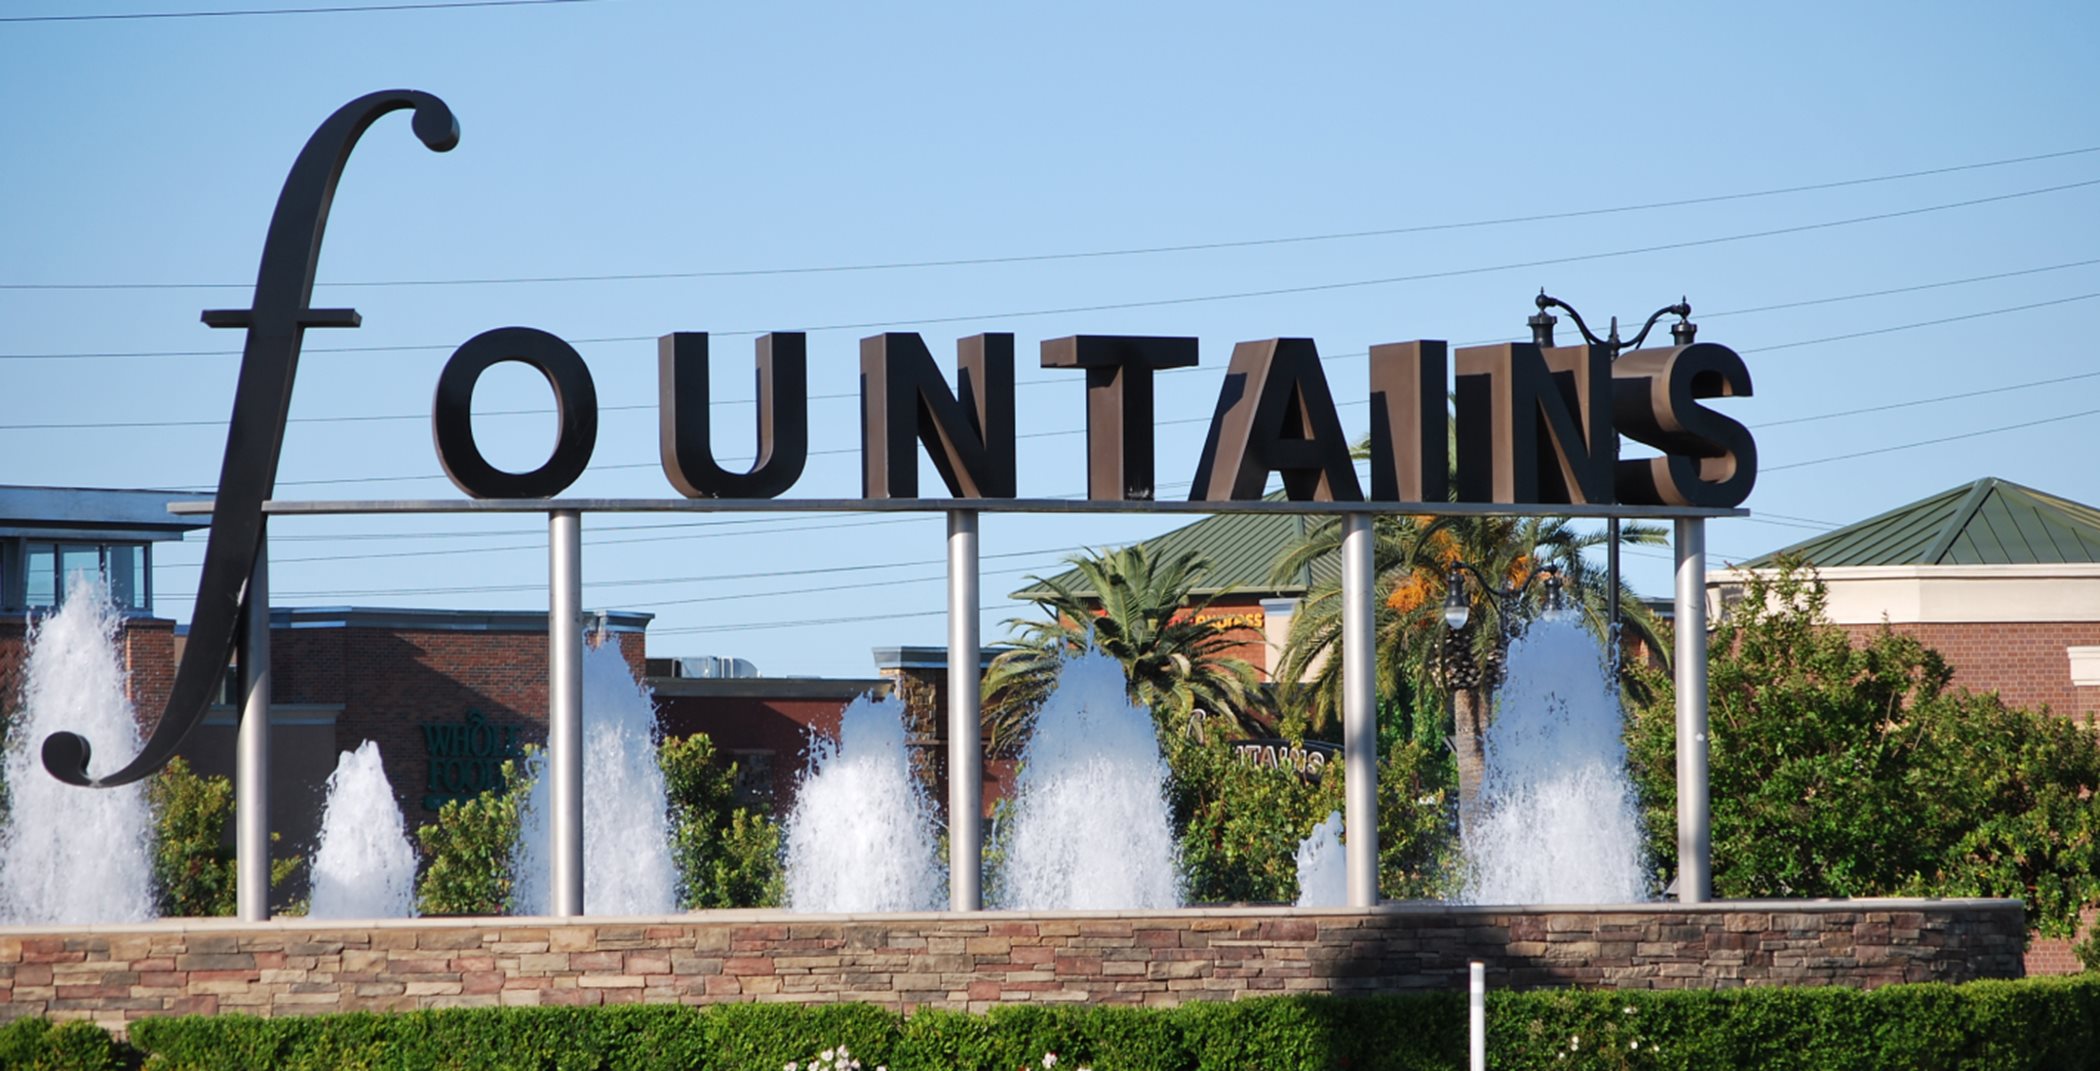 Fountains monument sign